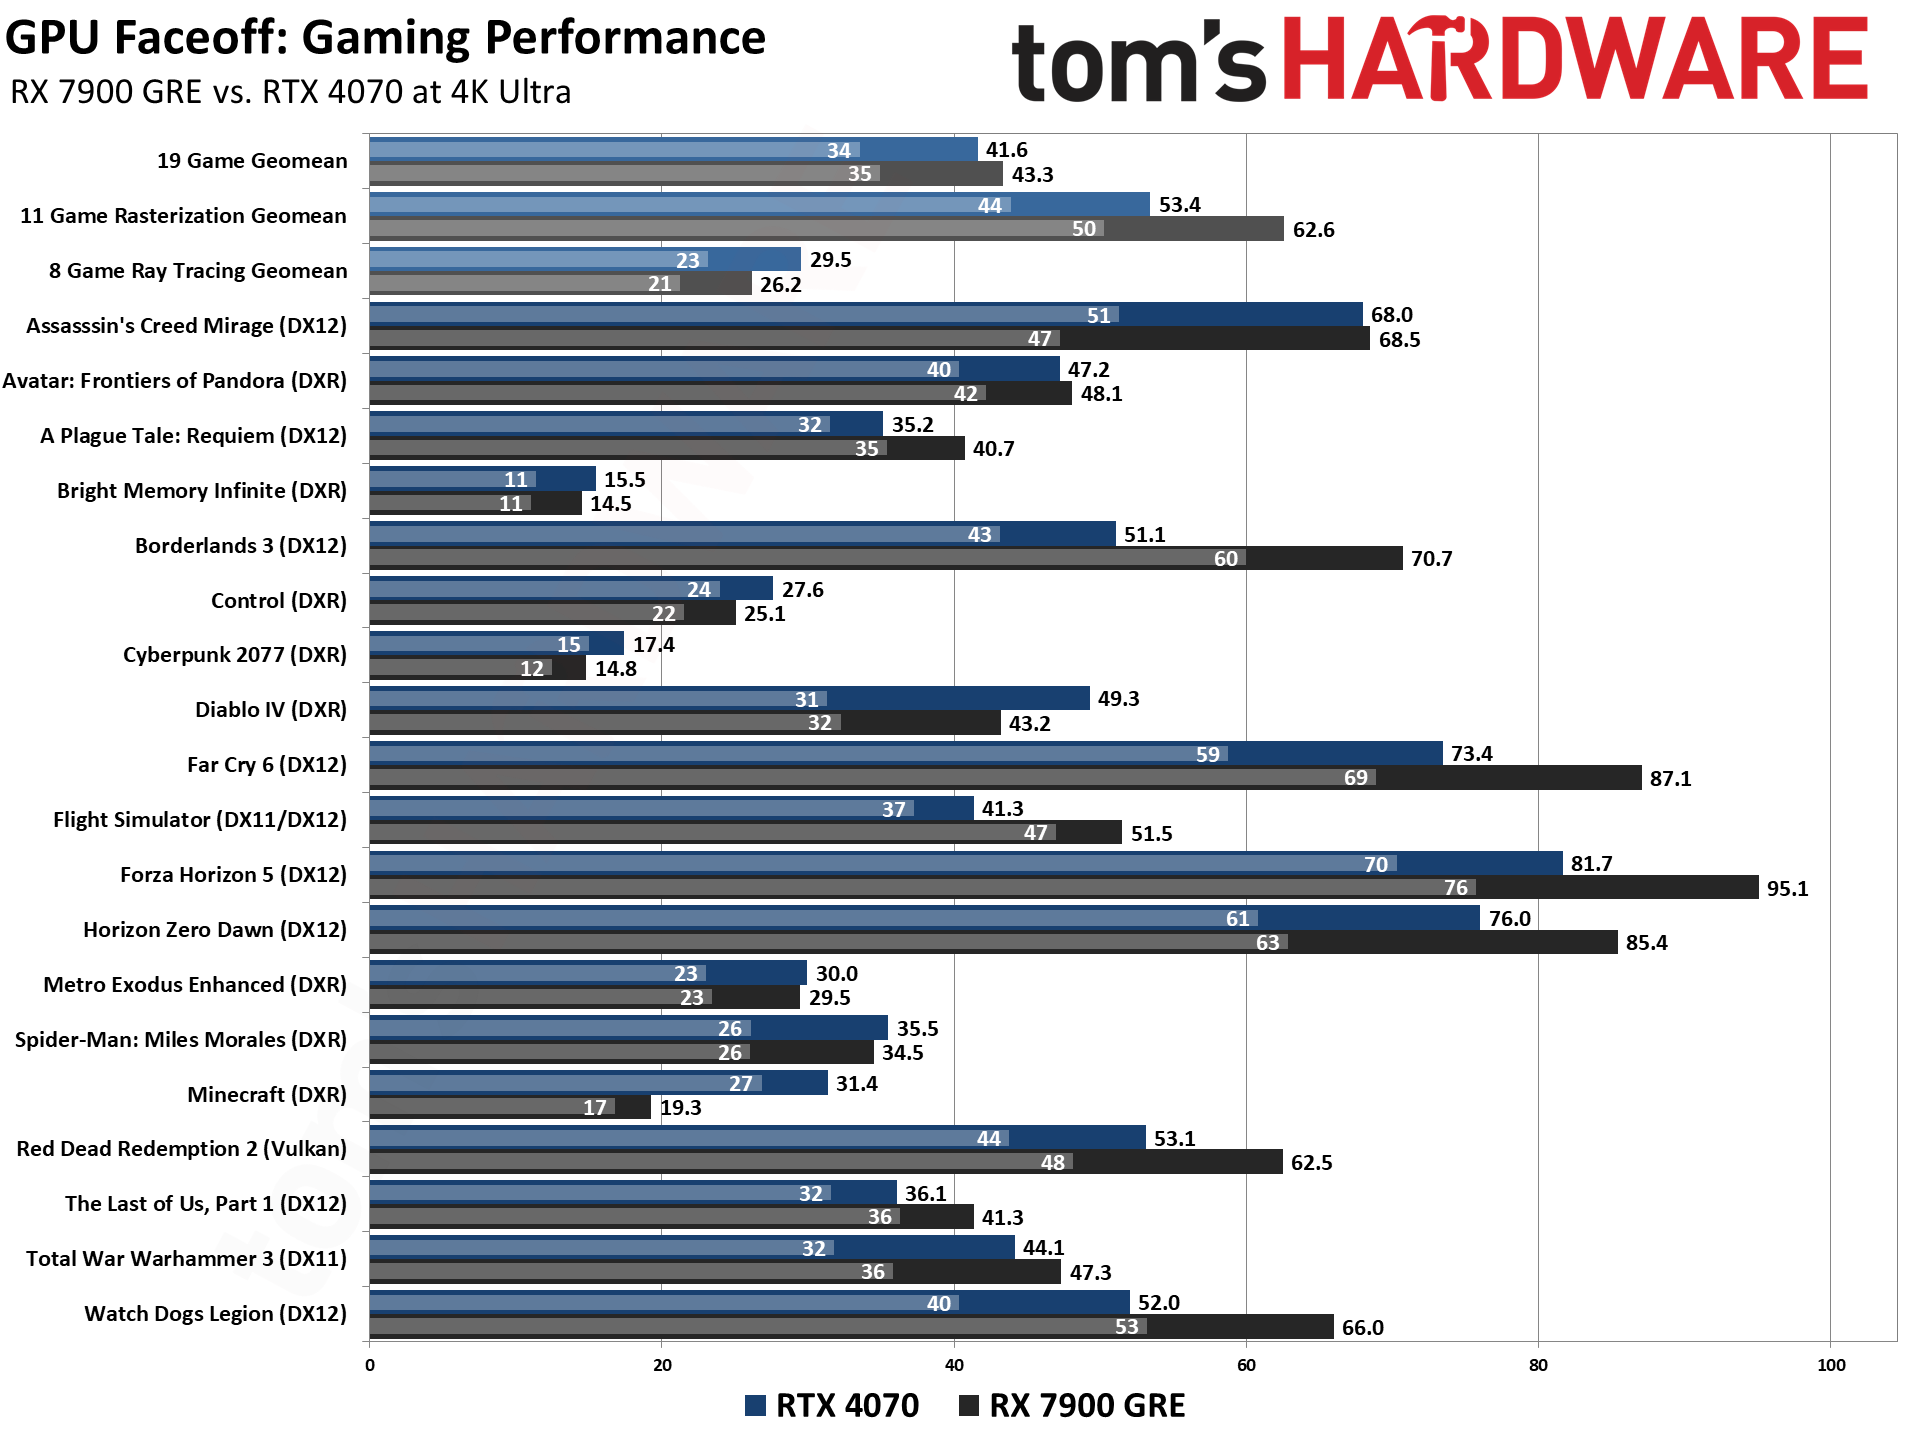 RTX 4070 vs RX 7900 GRE Gaming Performance